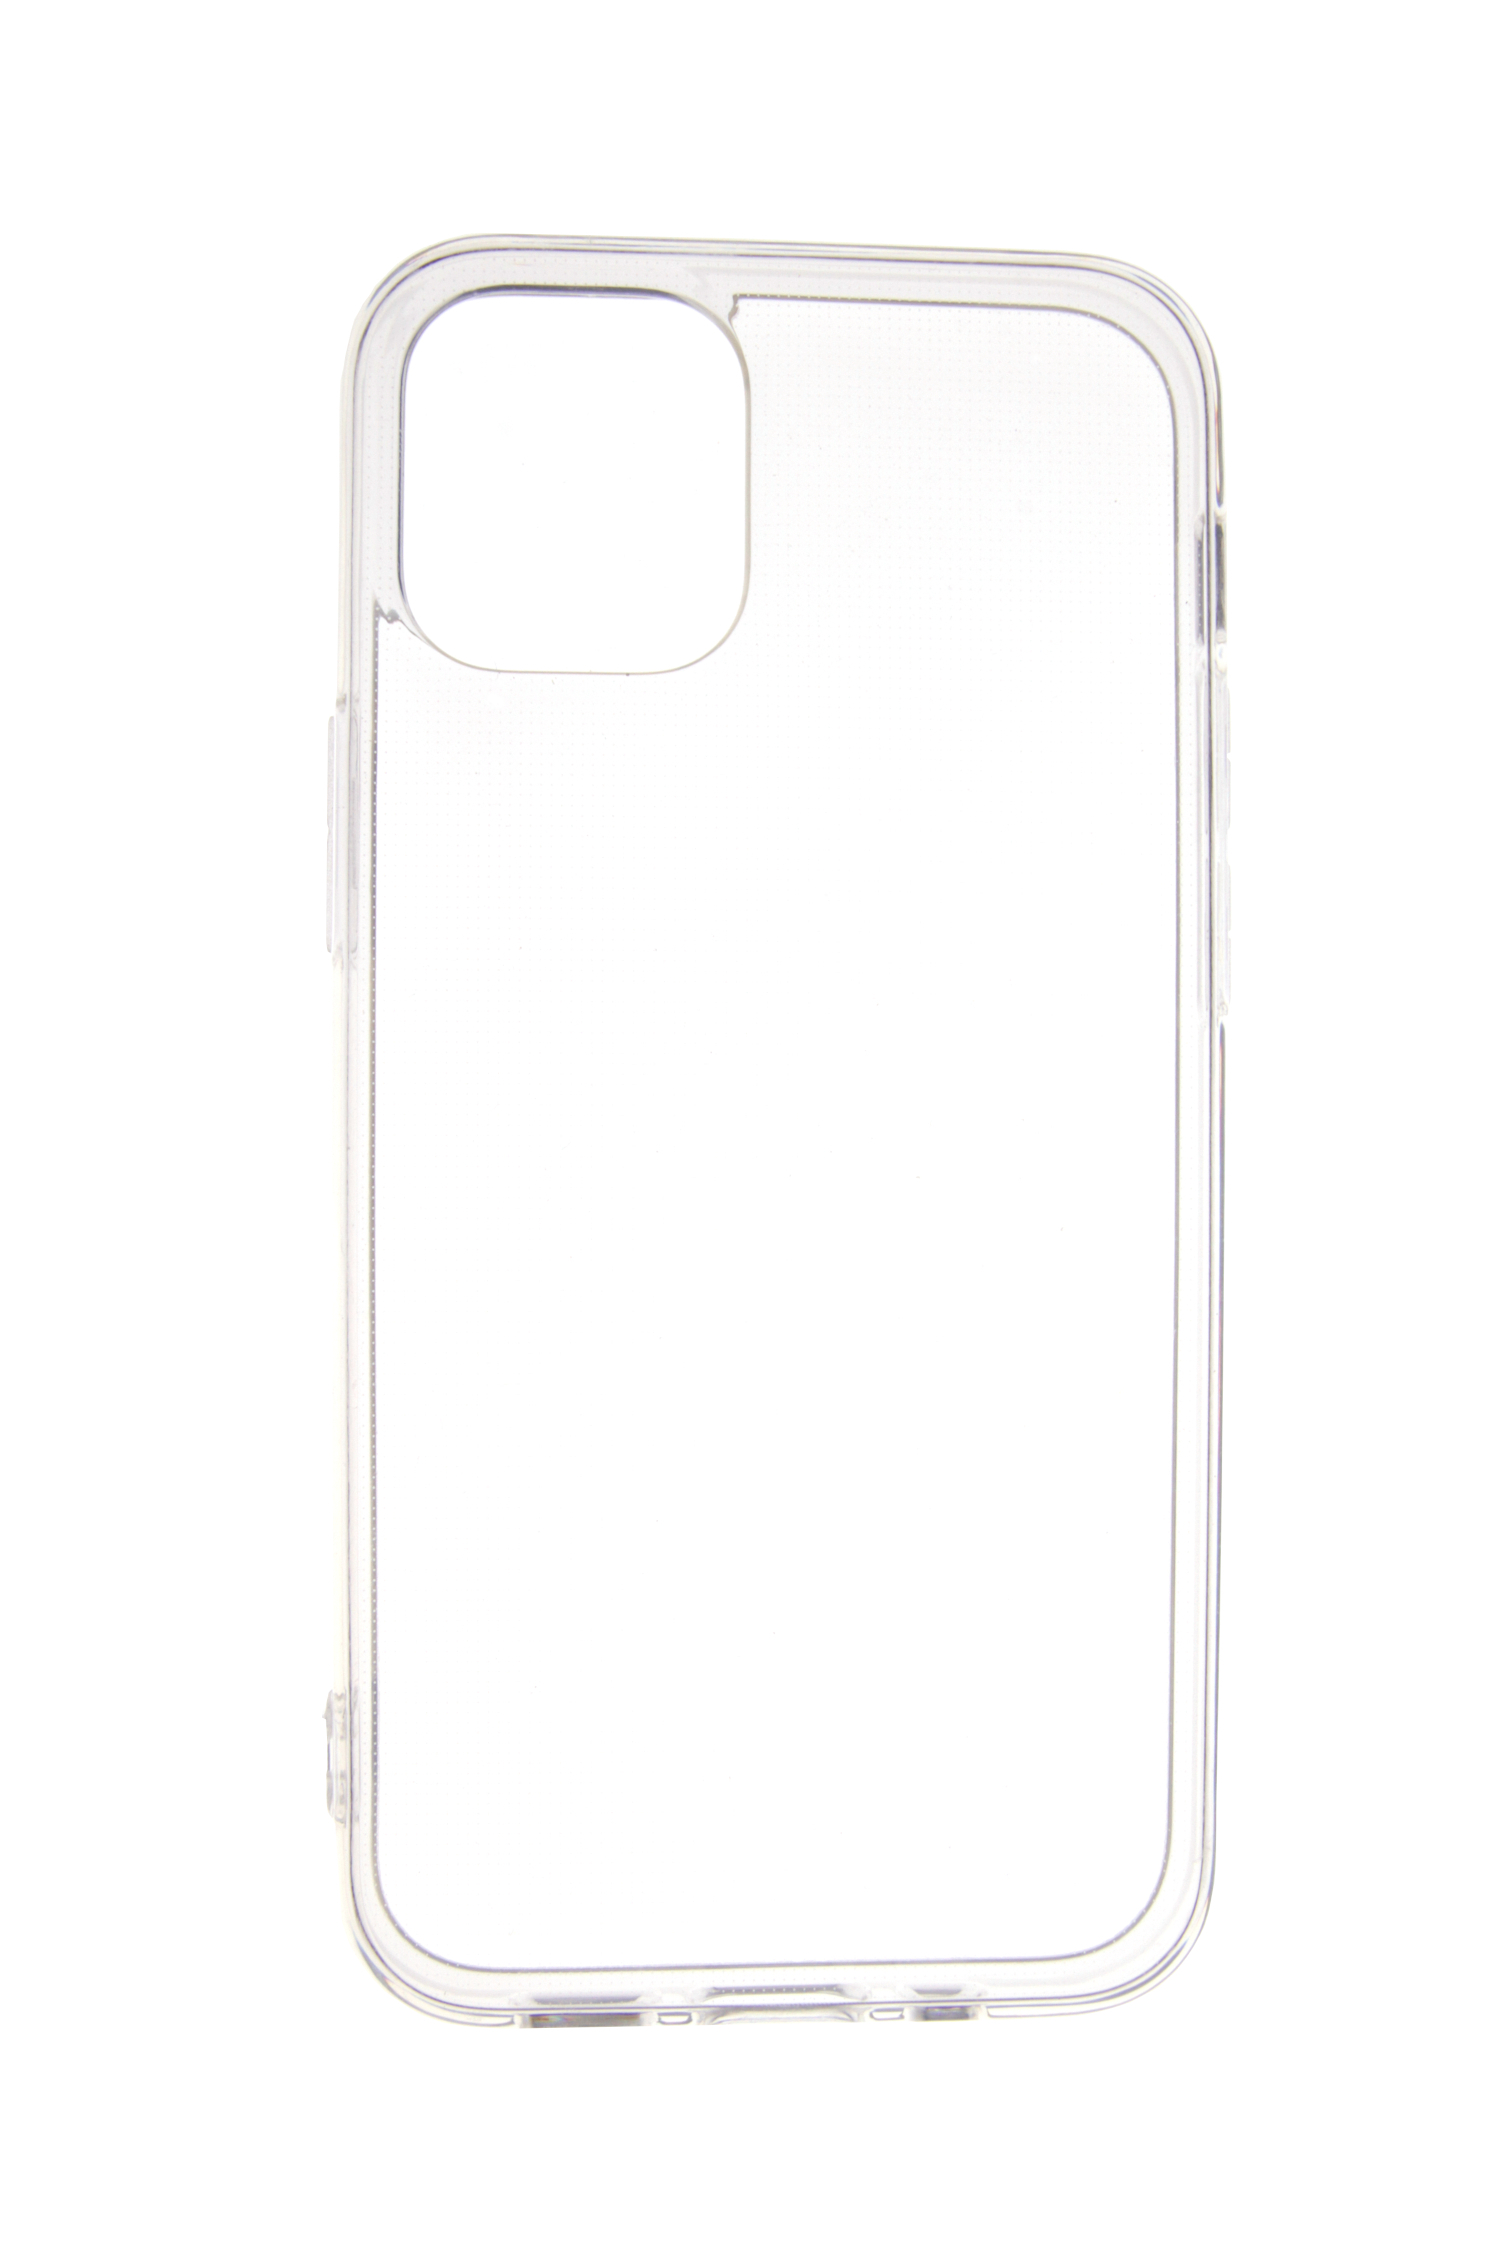 JAMCOVER 1.8 mm TPU Case, iPhone Transparent 12 / Pro, iPhone Backcover, 12 Apple